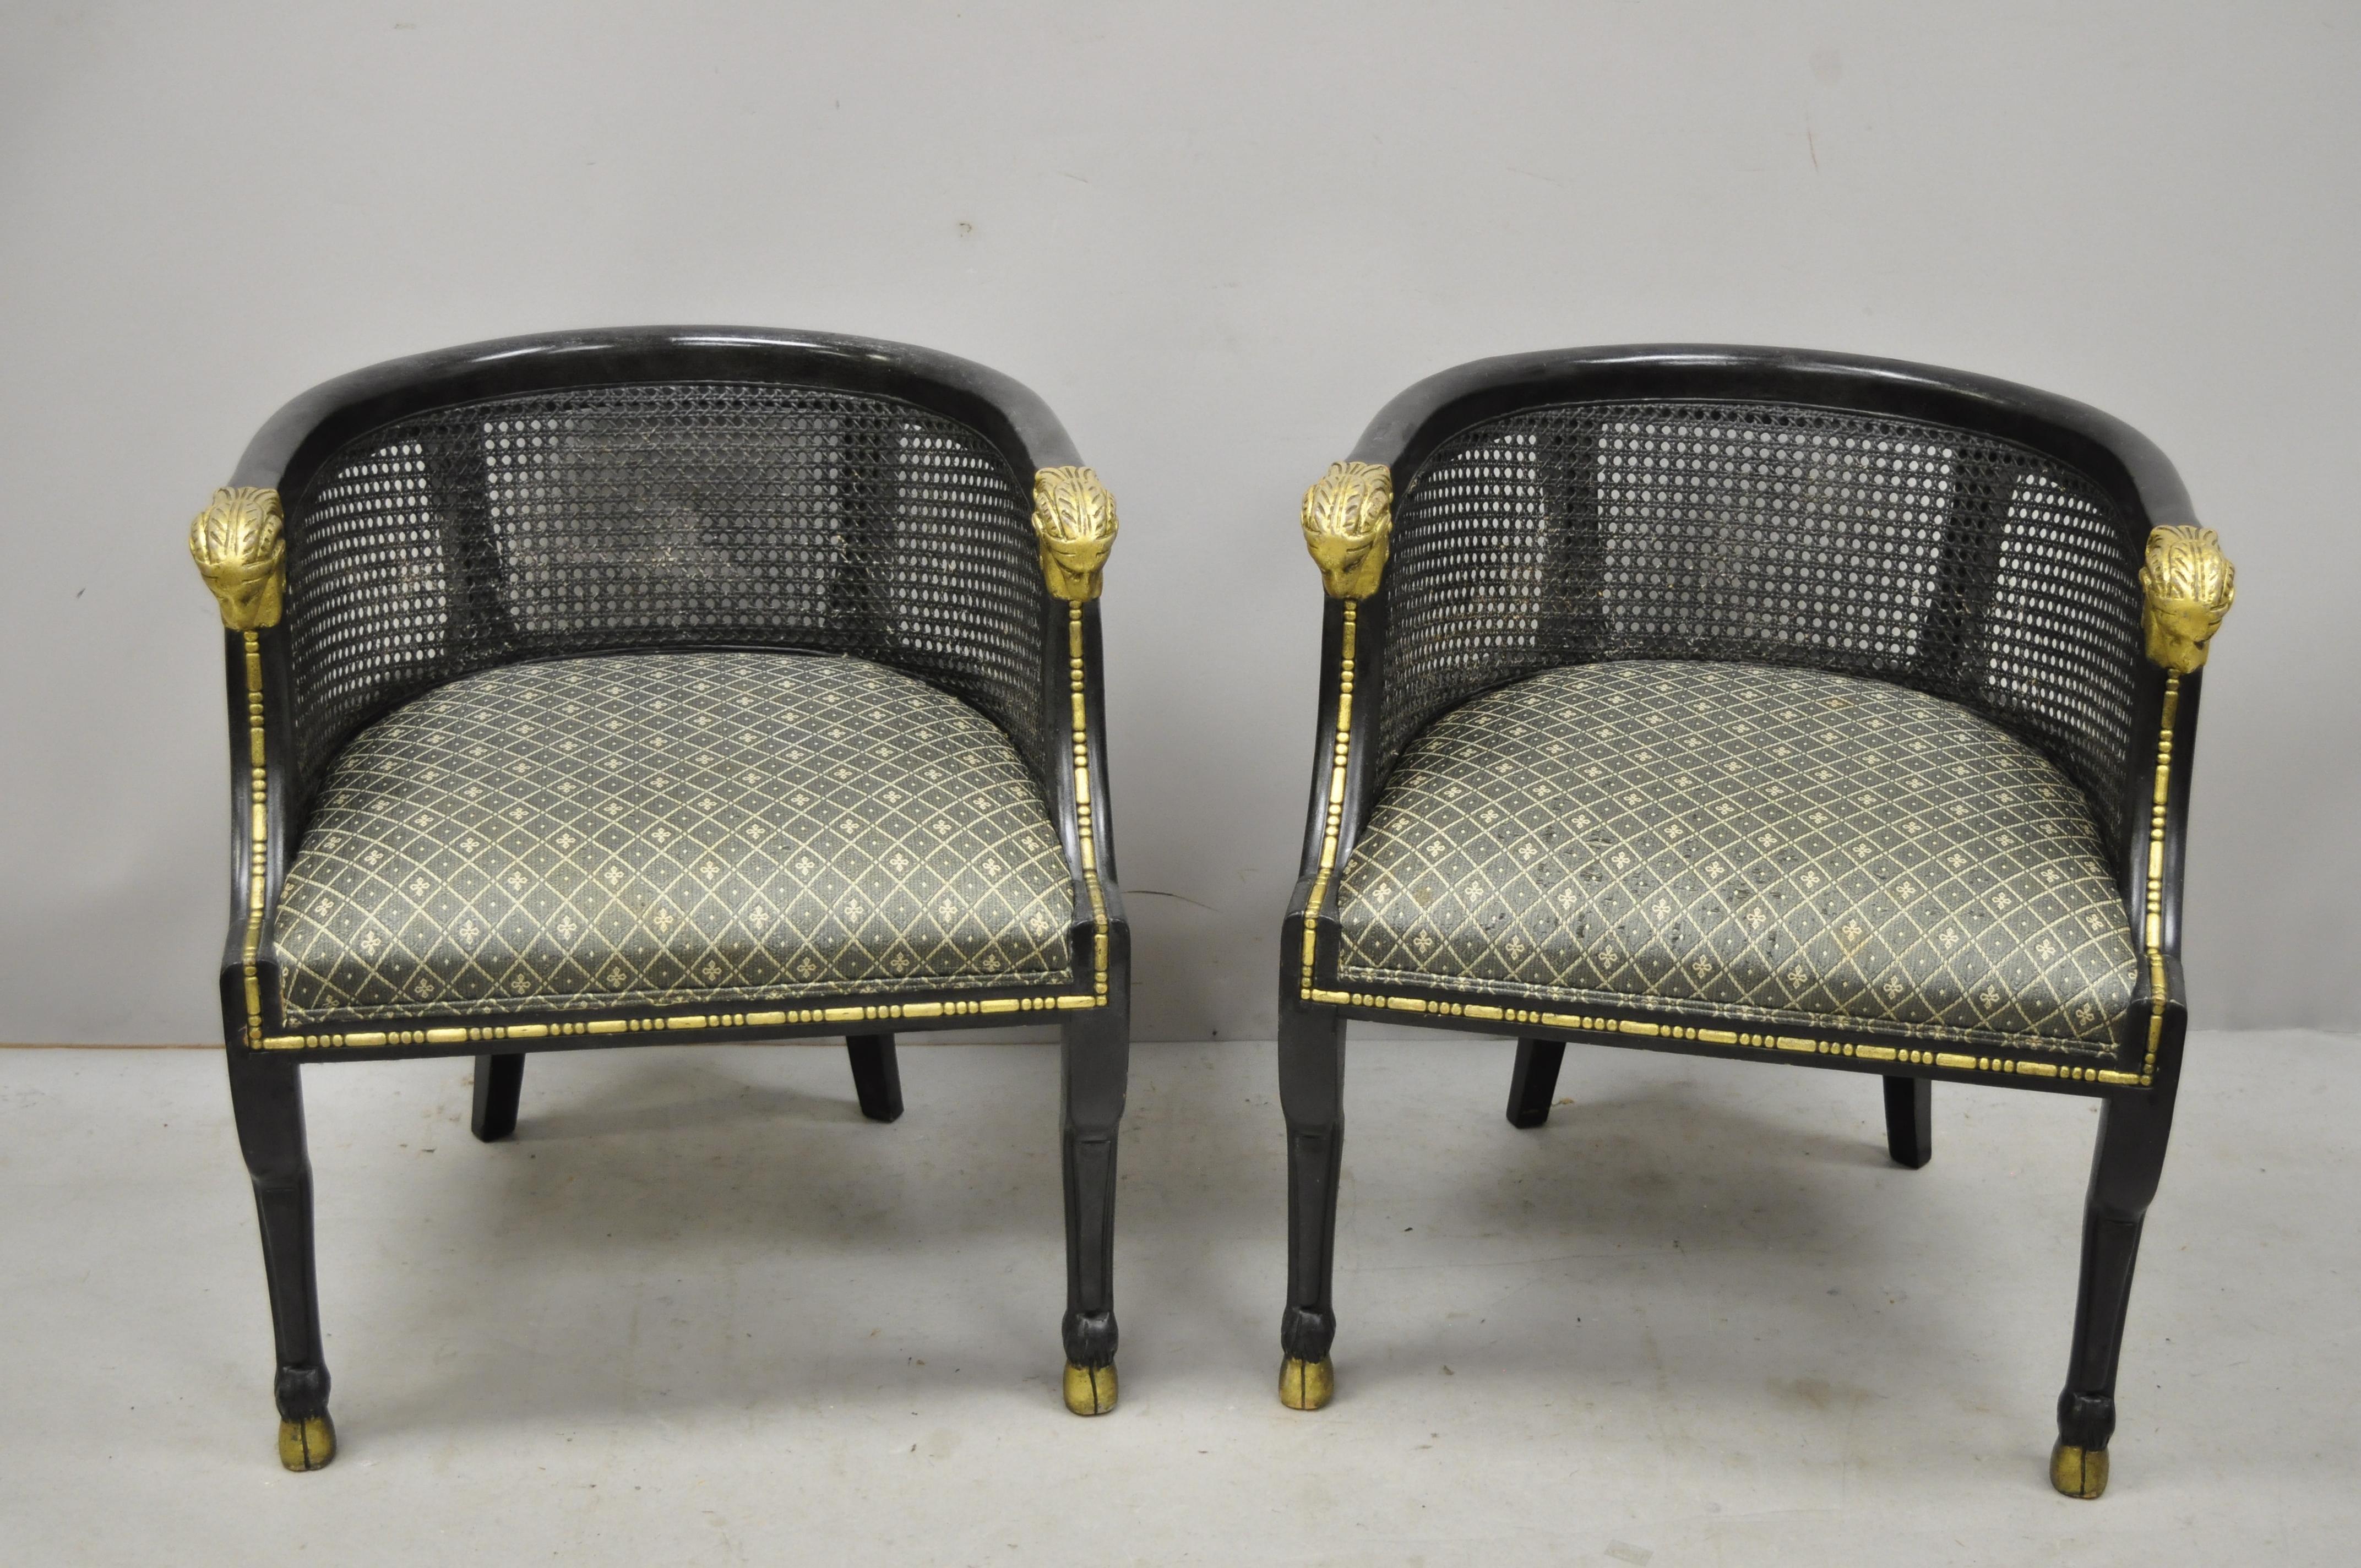 Pair of Cane Barrel back ram's head black and gold club lounge chairs. Item features cane barrel backs, ram's head armrests, hoof feet, nice low profile, solid wood frame, distressed finish, great style and form, circa mid-20th century.